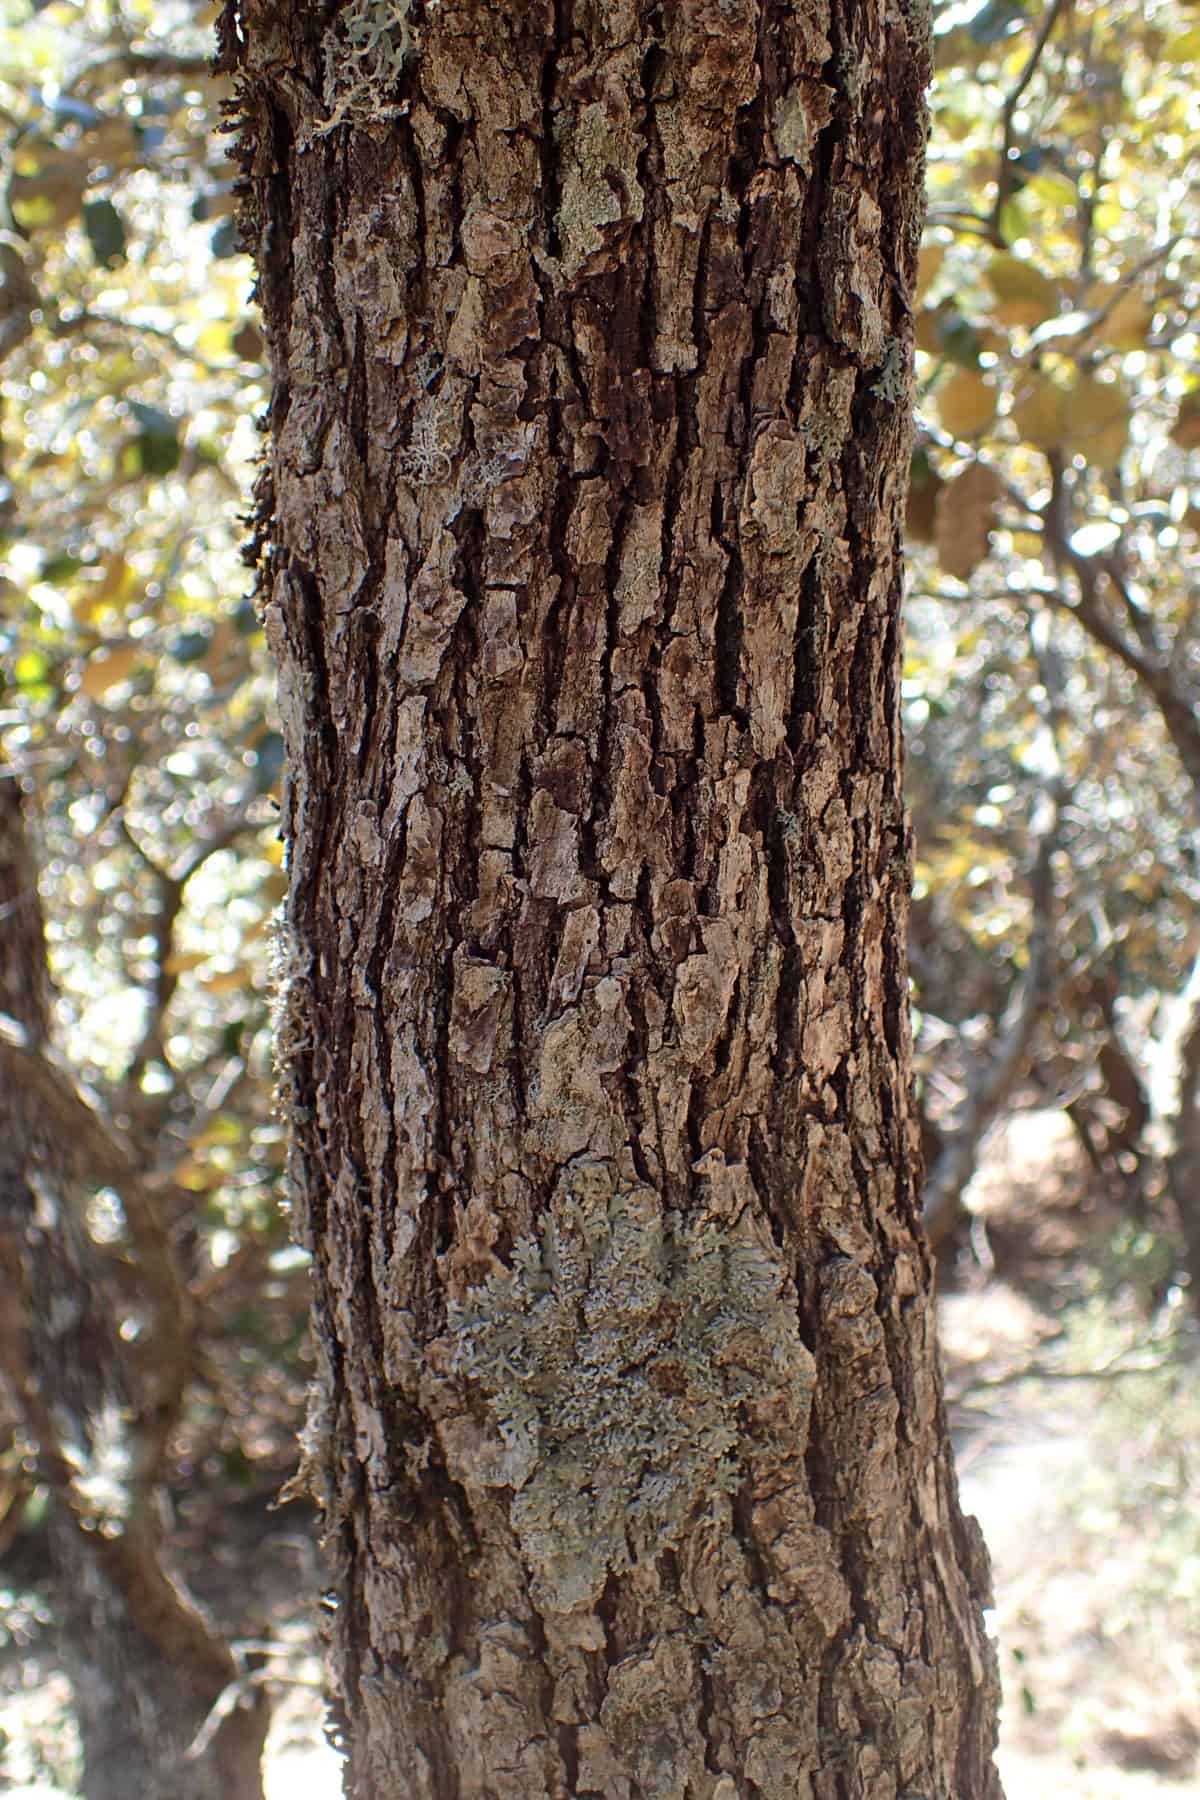 Close up of the trunk and bark of the golden oak tree.